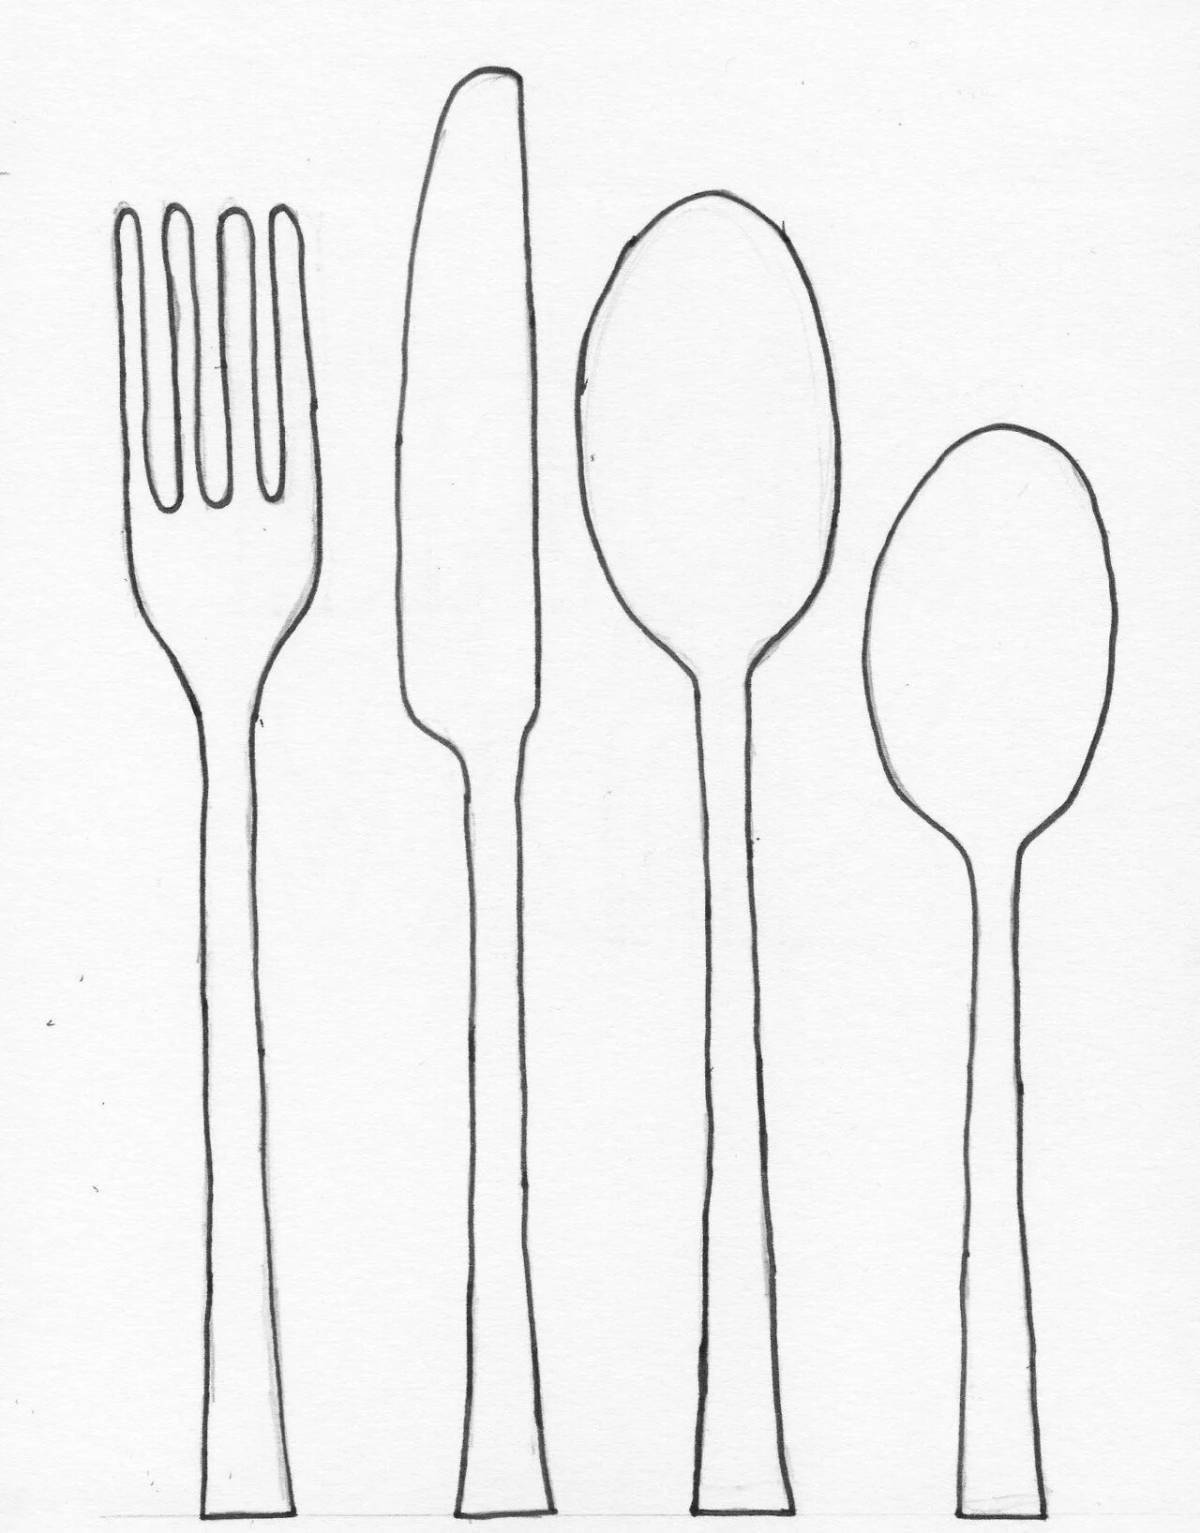 Charming cutlery coloring book for beginners